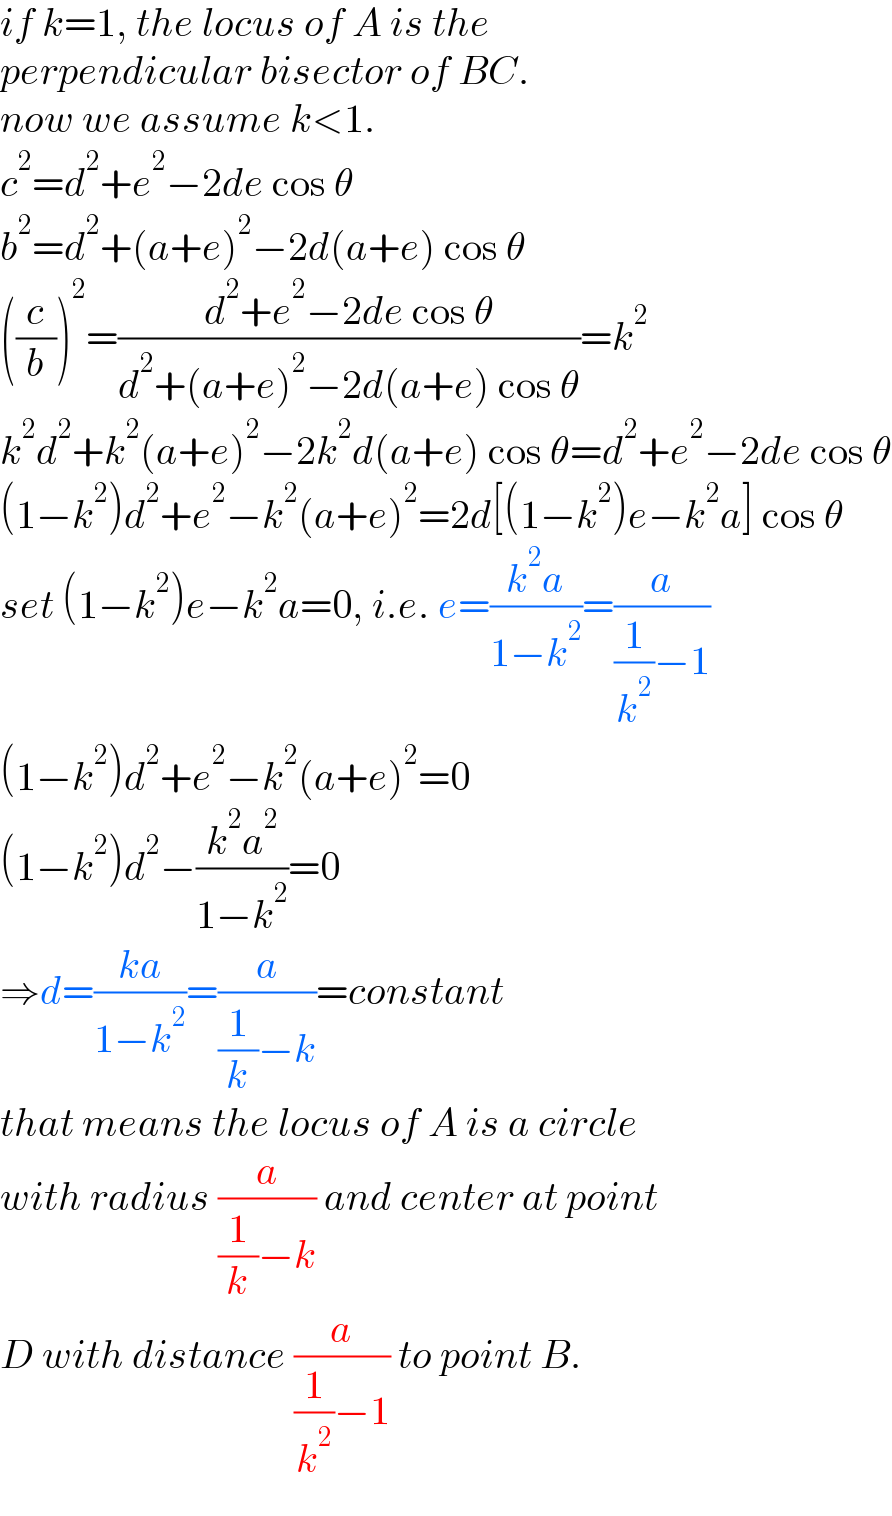 if k=1, the locus of A is the   perpendicular bisector of BC.  now we assume k<1.  c^2 =d^2 +e^2 −2de cos θ  b^2 =d^2 +(a+e)^2 −2d(a+e) cos θ  ((c/b))^2 =((d^2 +e^2 −2de cos θ)/(d^2 +(a+e)^2 −2d(a+e) cos θ))=k^2    k^2 d^2 +k^2 (a+e)^2 −2k^2 d(a+e) cos θ=d^2 +e^2 −2de cos θ  (1−k^2 )d^2 +e^2 −k^2 (a+e)^2 =2d[(1−k^2 )e−k^2 a] cos θ  set (1−k^2 )e−k^2 a=0, i.e. e=((k^2 a)/(1−k^2 ))=(a/((1/k^2 )−1))  (1−k^2 )d^2 +e^2 −k^2 (a+e)^2 =0  (1−k^2 )d^2 −((k^2 a^2 )/(1−k^2 ))=0  ⇒d=((ka)/(1−k^2 ))=(a/((1/k)−k))=constant  that means the locus of A is a circle  with radius (a/((1/k)−k)) and center at point  D with distance (a/((1/k^2 )−1)) to point B.  